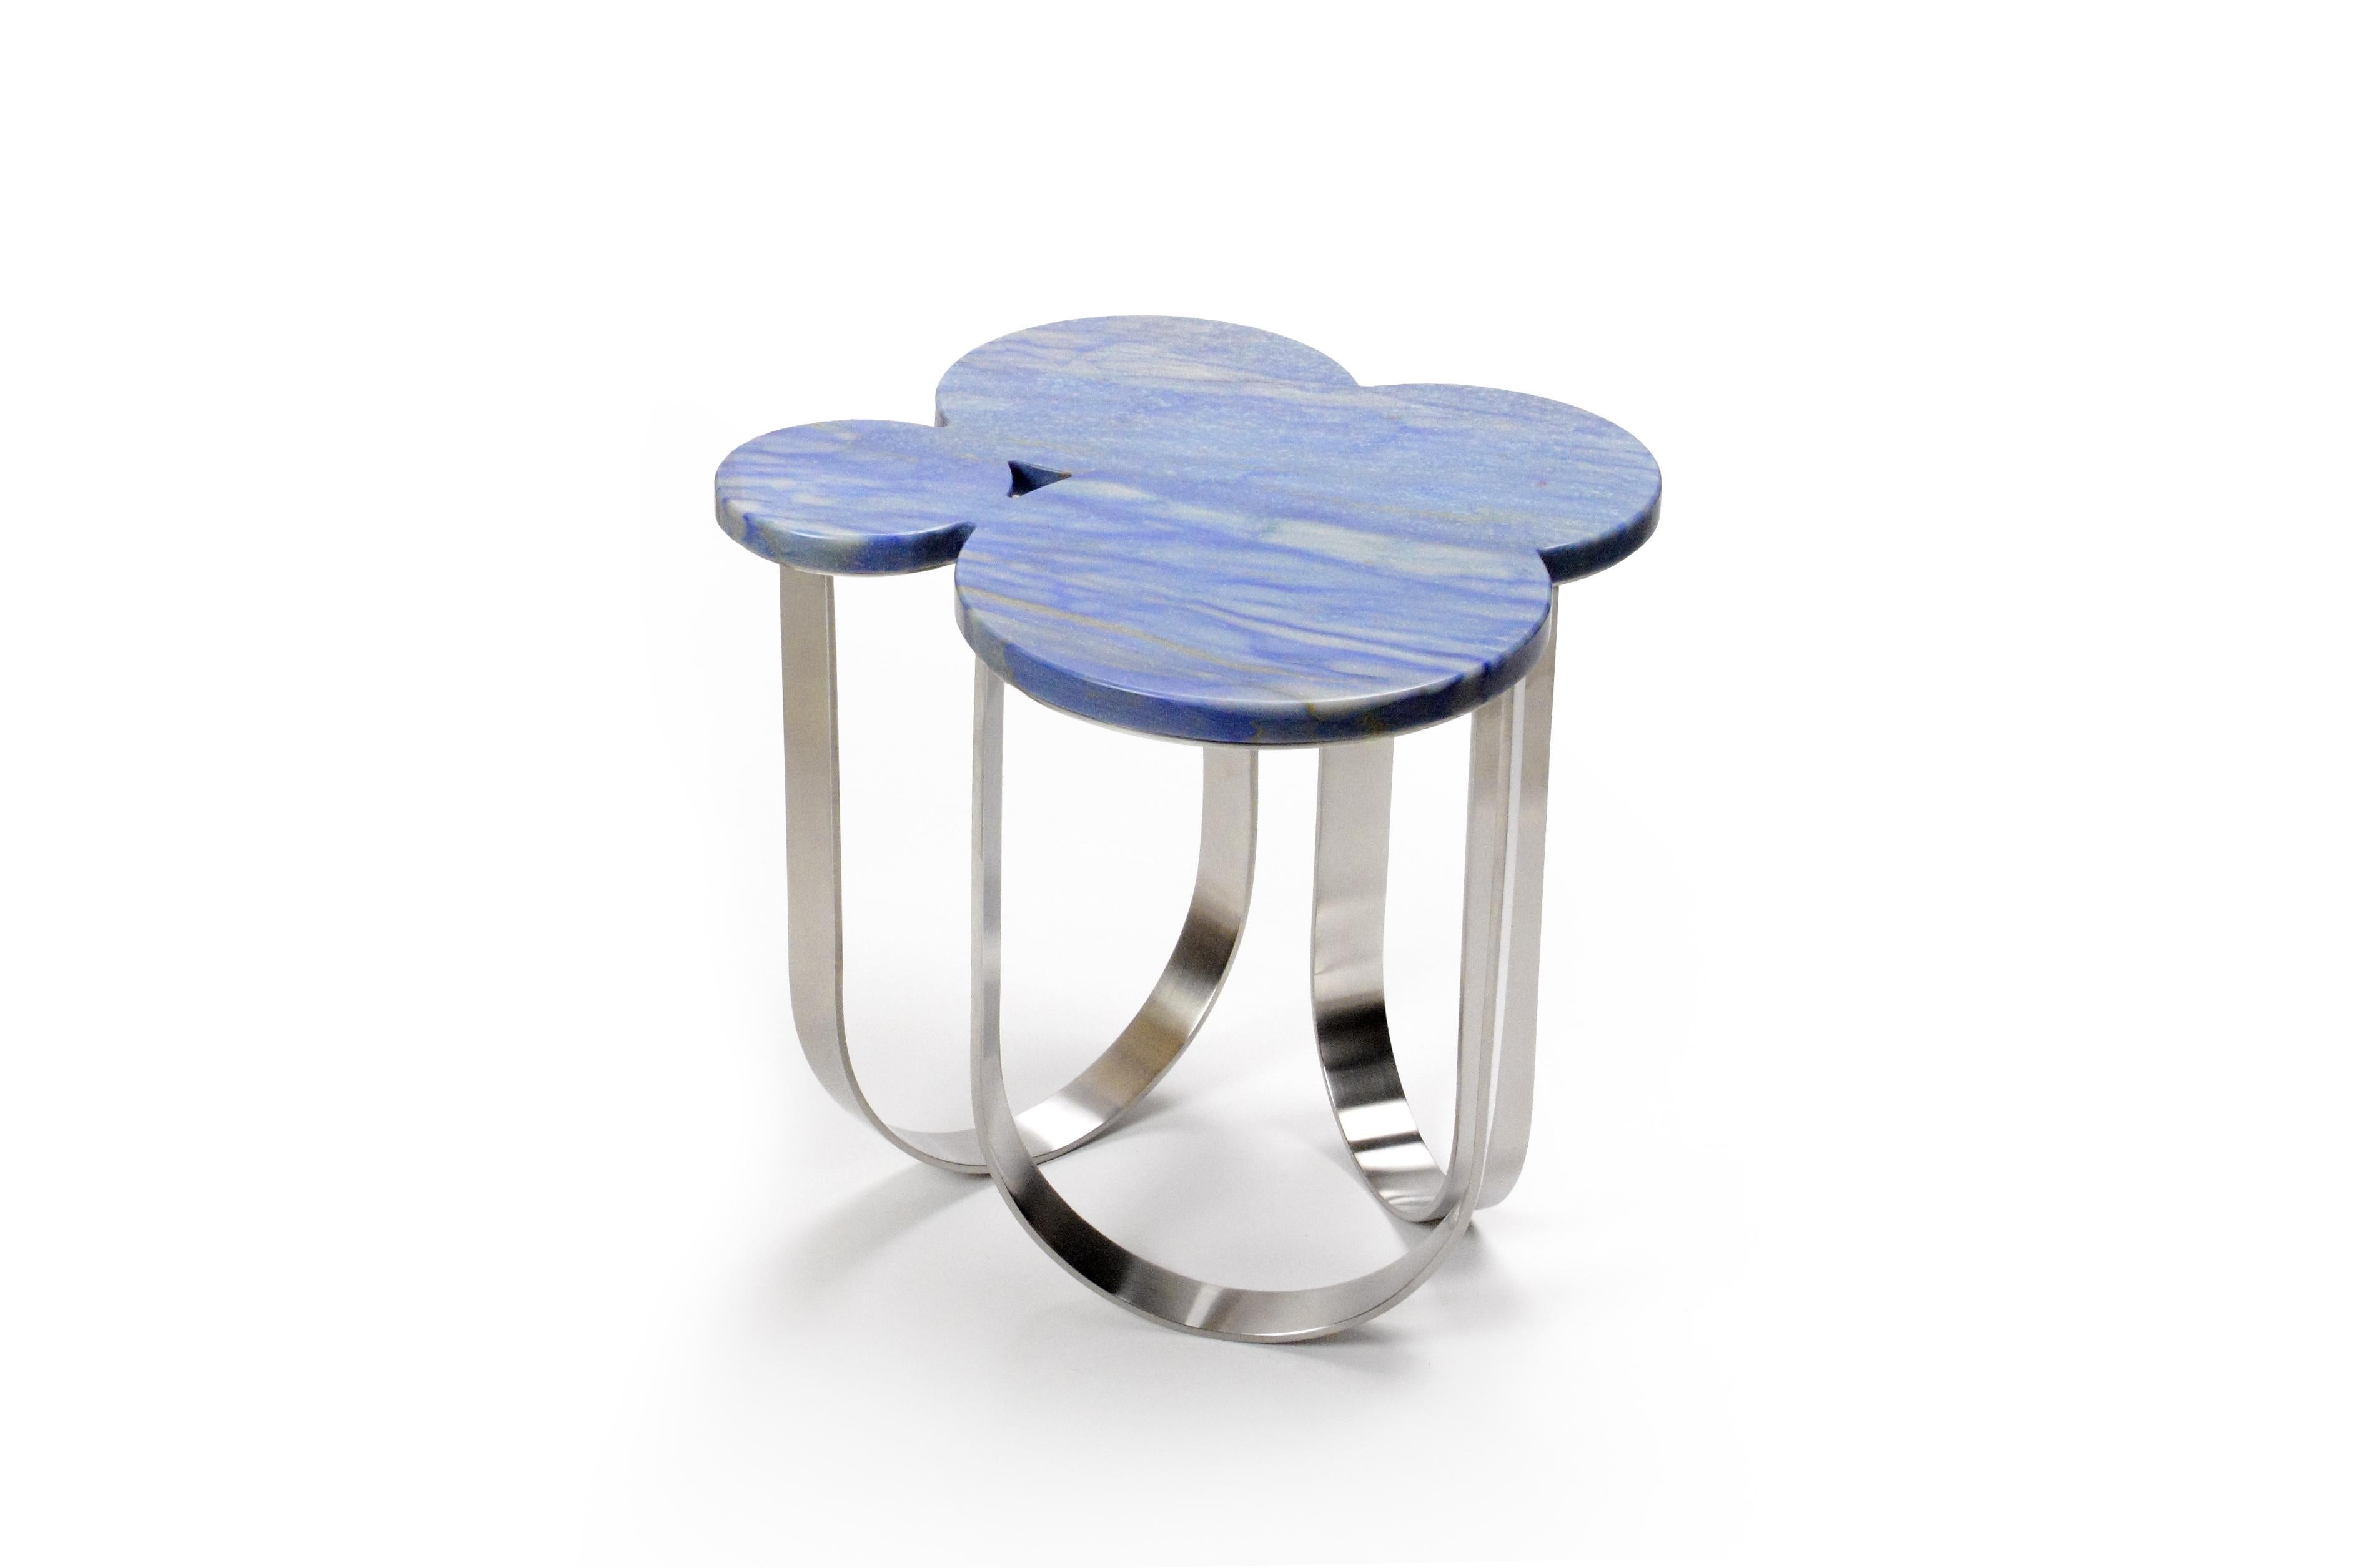 The 'Cloud' is a spectacular side table with structure in brushed stainless steel and top in Azul Macaubas quartzite.
The mirror-like finishing of the stainless steel creates different perceptions of this particular material and allows interesting